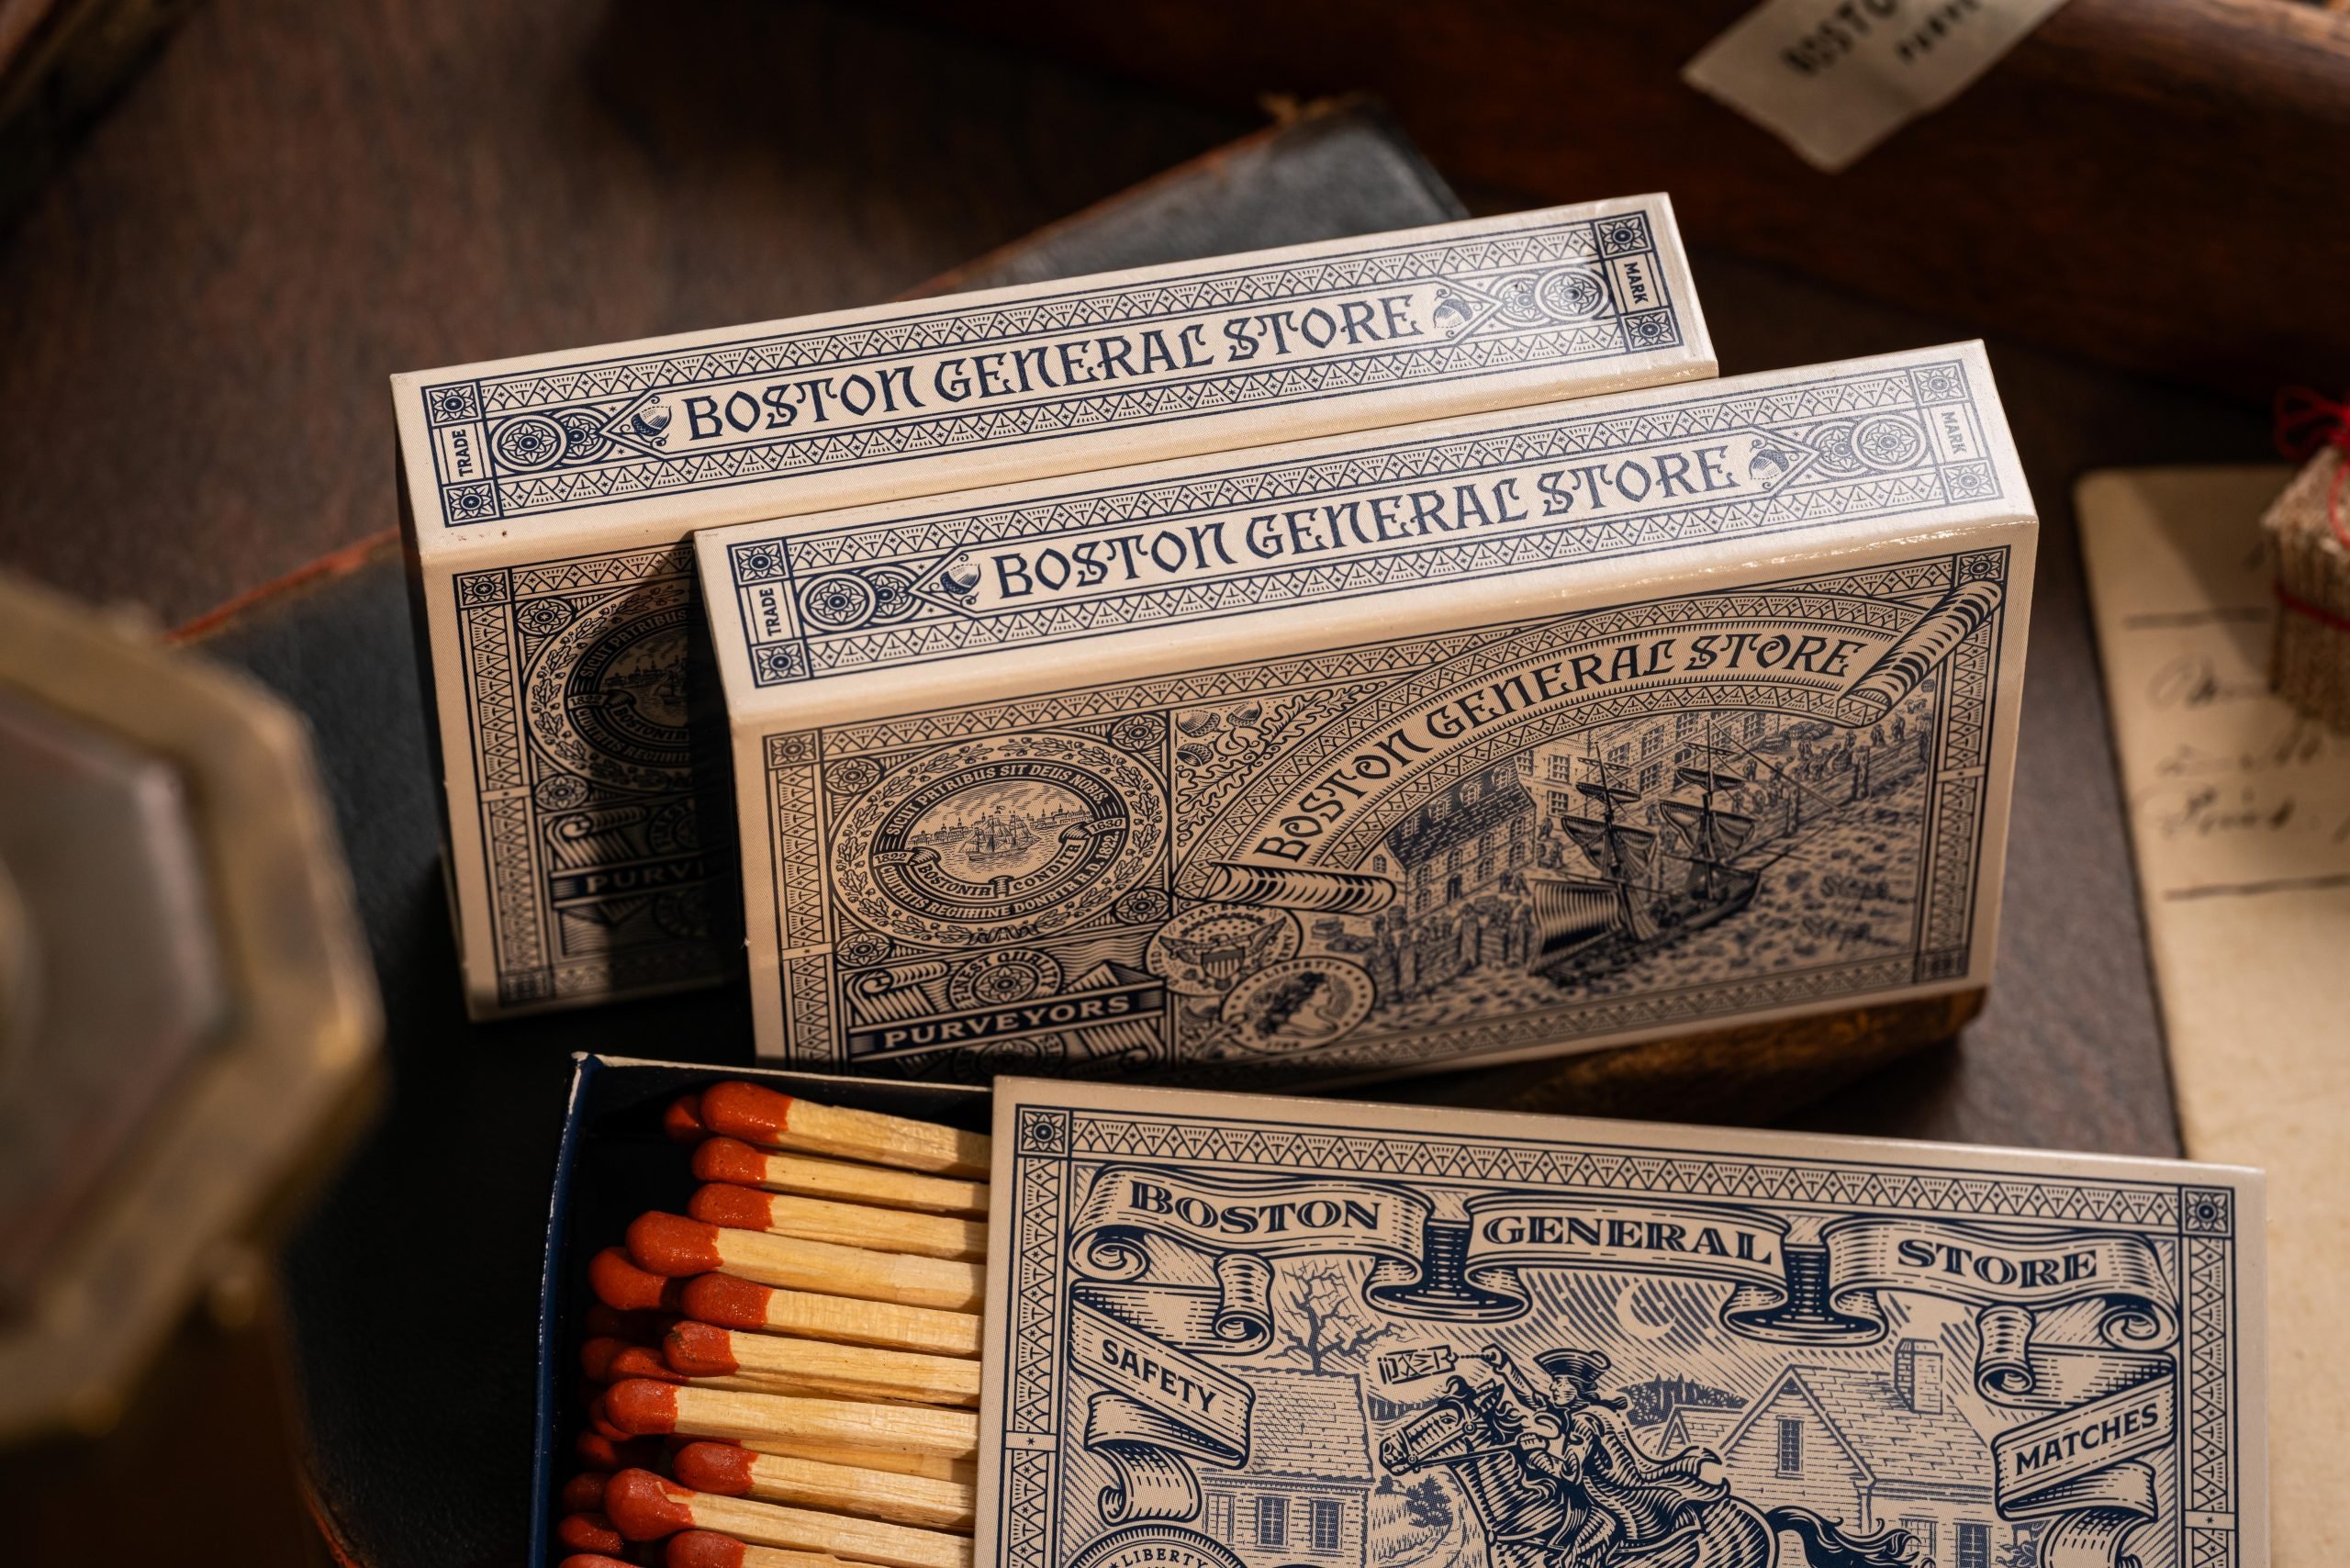 Boston General Store’s Old-Timey Matches Look Straight Out of a Smithsonian Exhibit